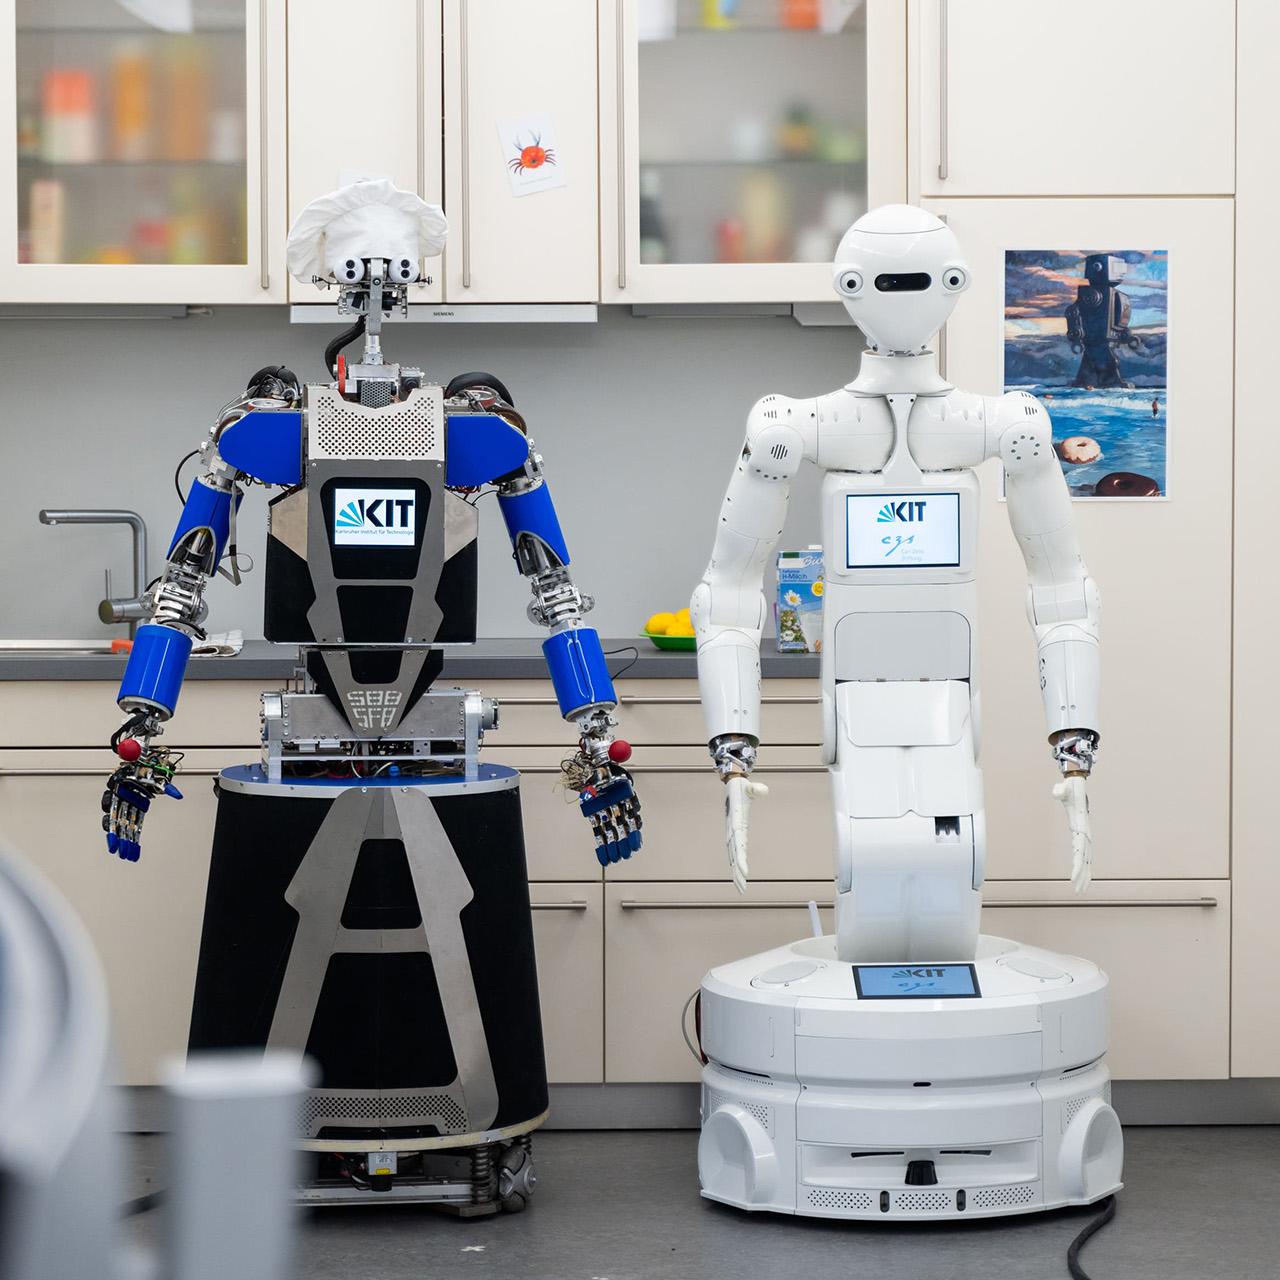 Development of robots in the lab